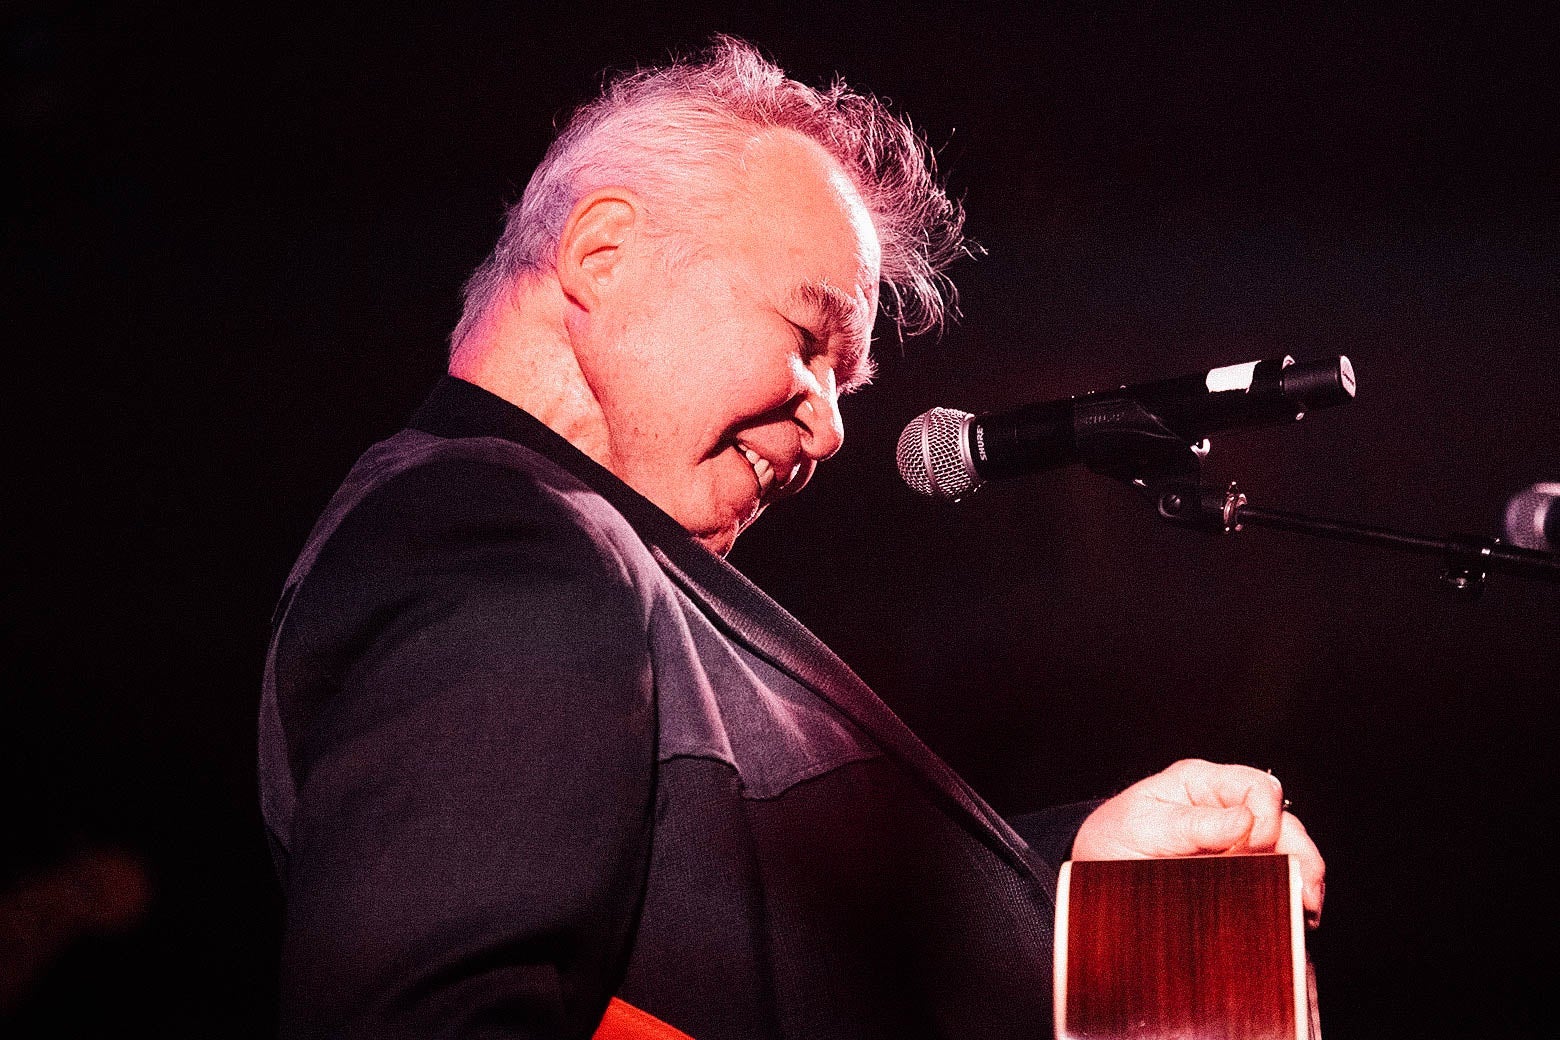 John Prine smiling as he performs with his guitar onstage